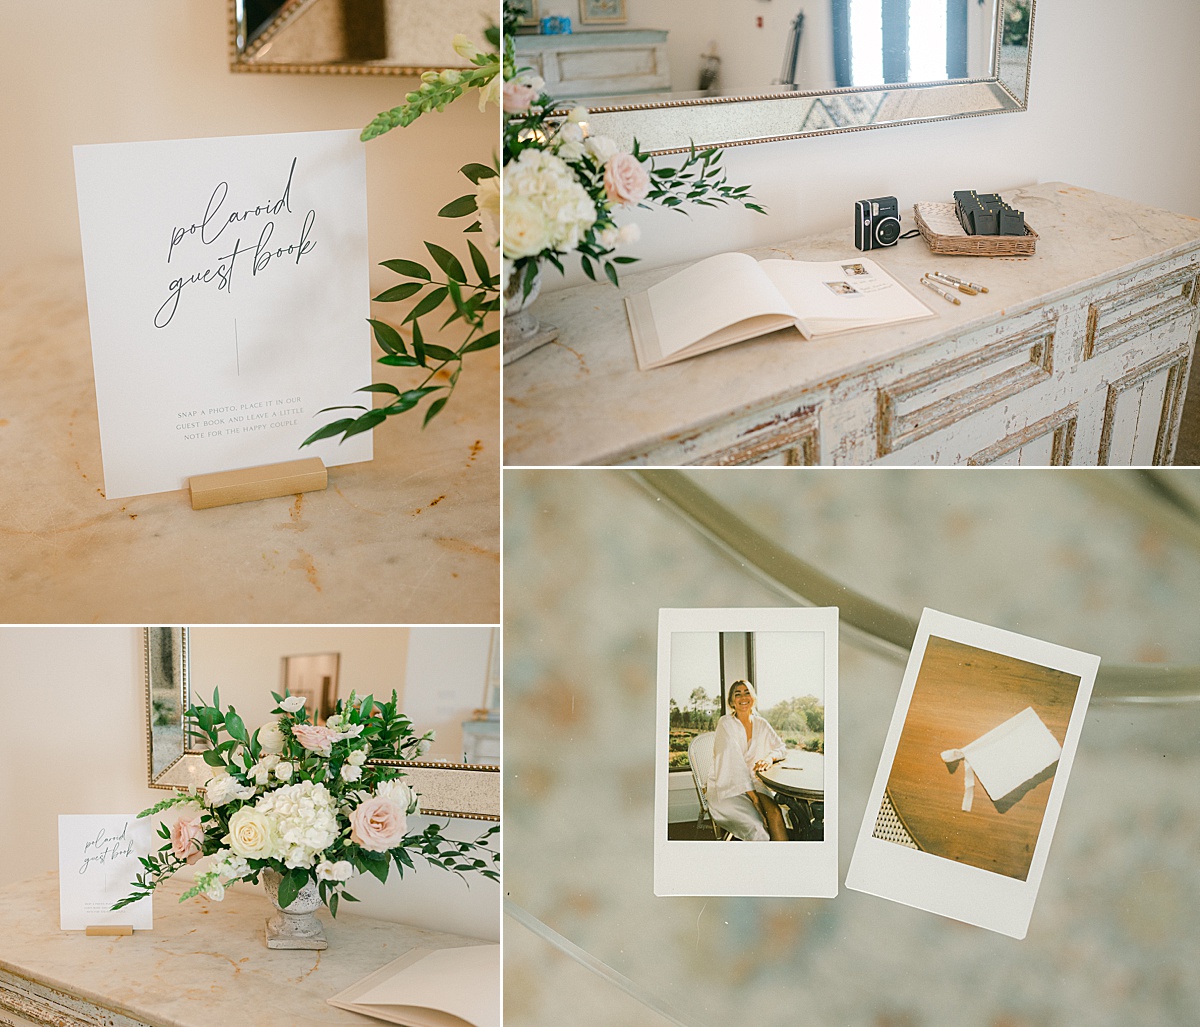 Polaroid guest book wedding sign and camera photo station. 